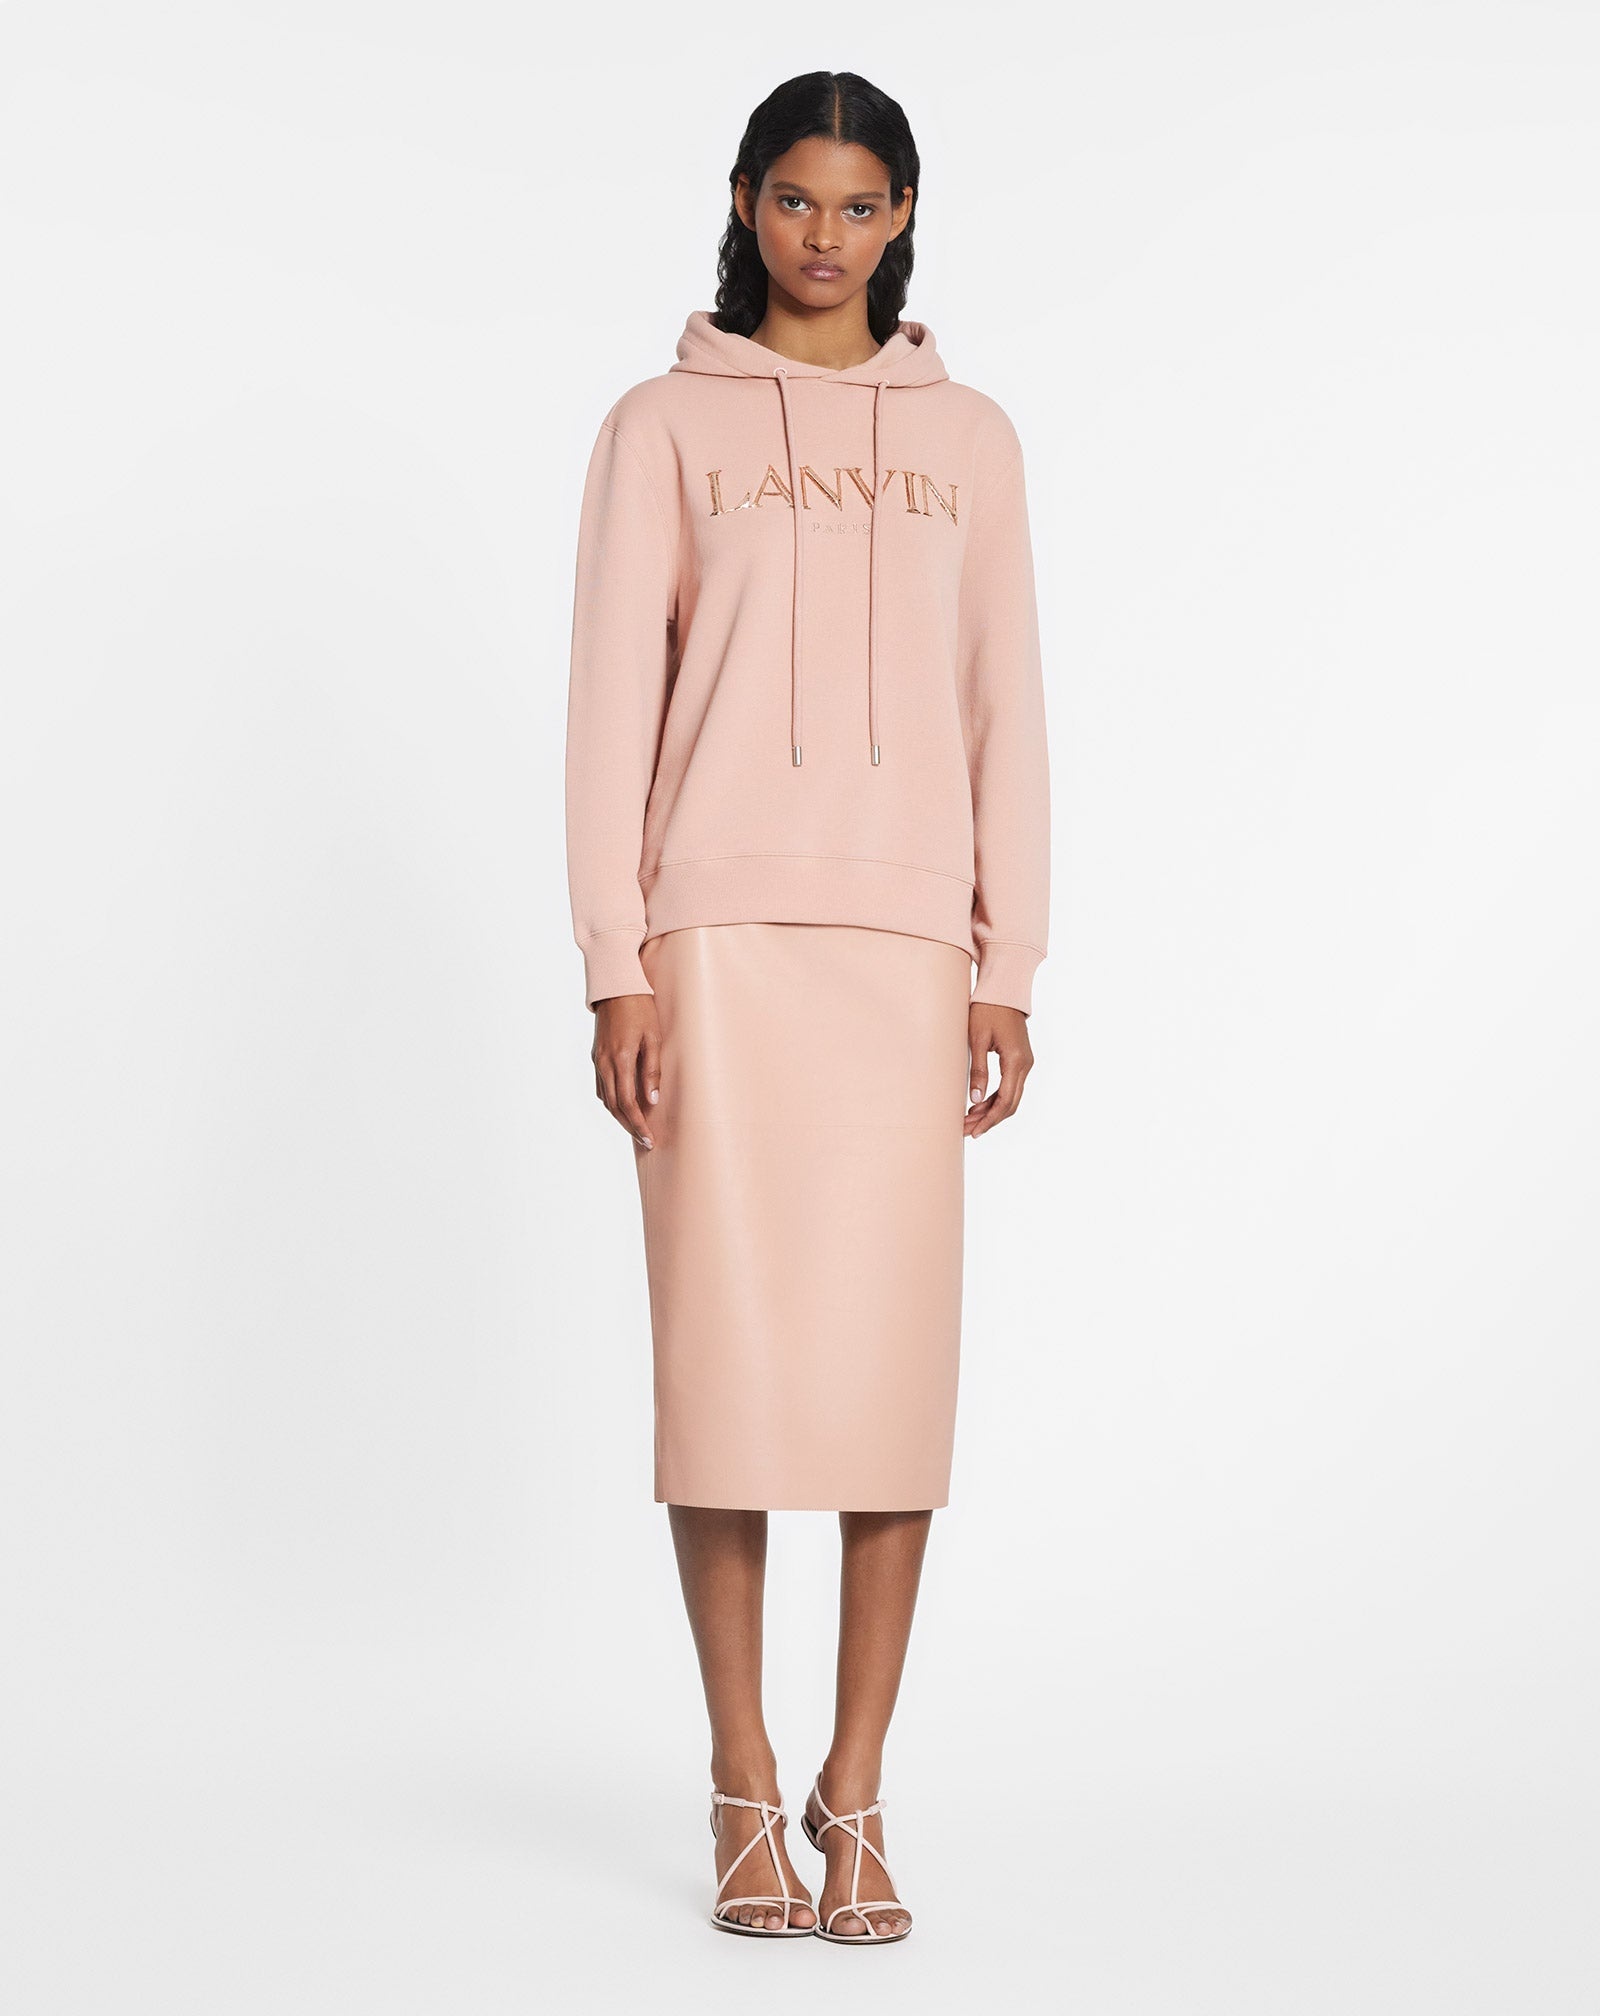 LANVIN PARIS EMBROIDERED HOODED SWEATER - 2